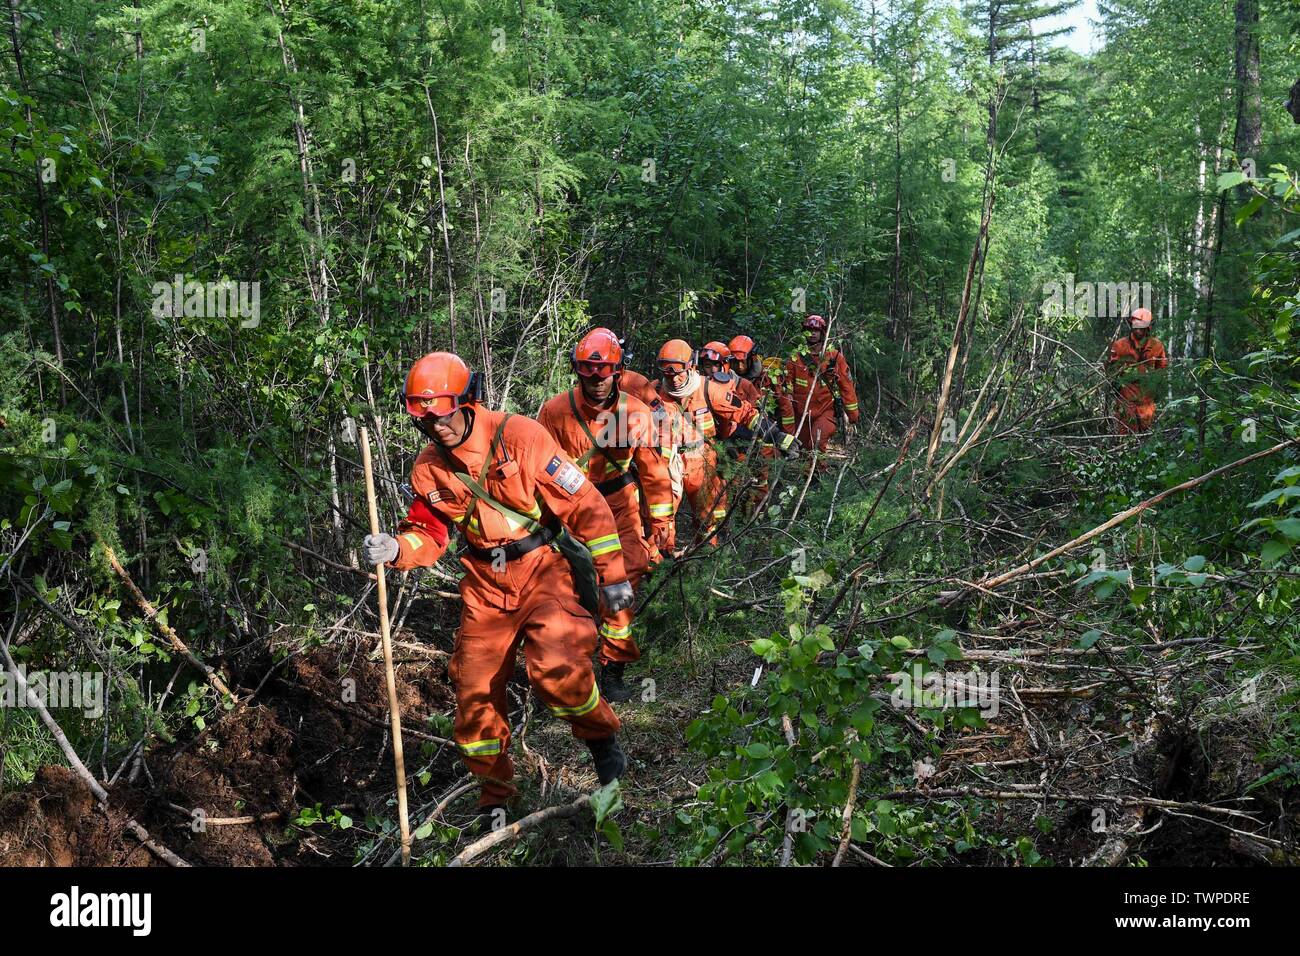 Genhe. 22nd June, 2019. Firefighters make their way to a forest fire site in north China's Inner A forest fire that raged for three days in north China's Inner Mongolia Autonomous Region has been contained, local authorities said Saturday. The clean-up operation is underway at Xiushan, according to the firefighting headquarters. After a huge effort by over 5,000 firefighters, the fire was put under control on all fronts by 4:40 p.m. Saturday. Credit: Liu Lei/Xinhua/Alamy Live News Stock Photo